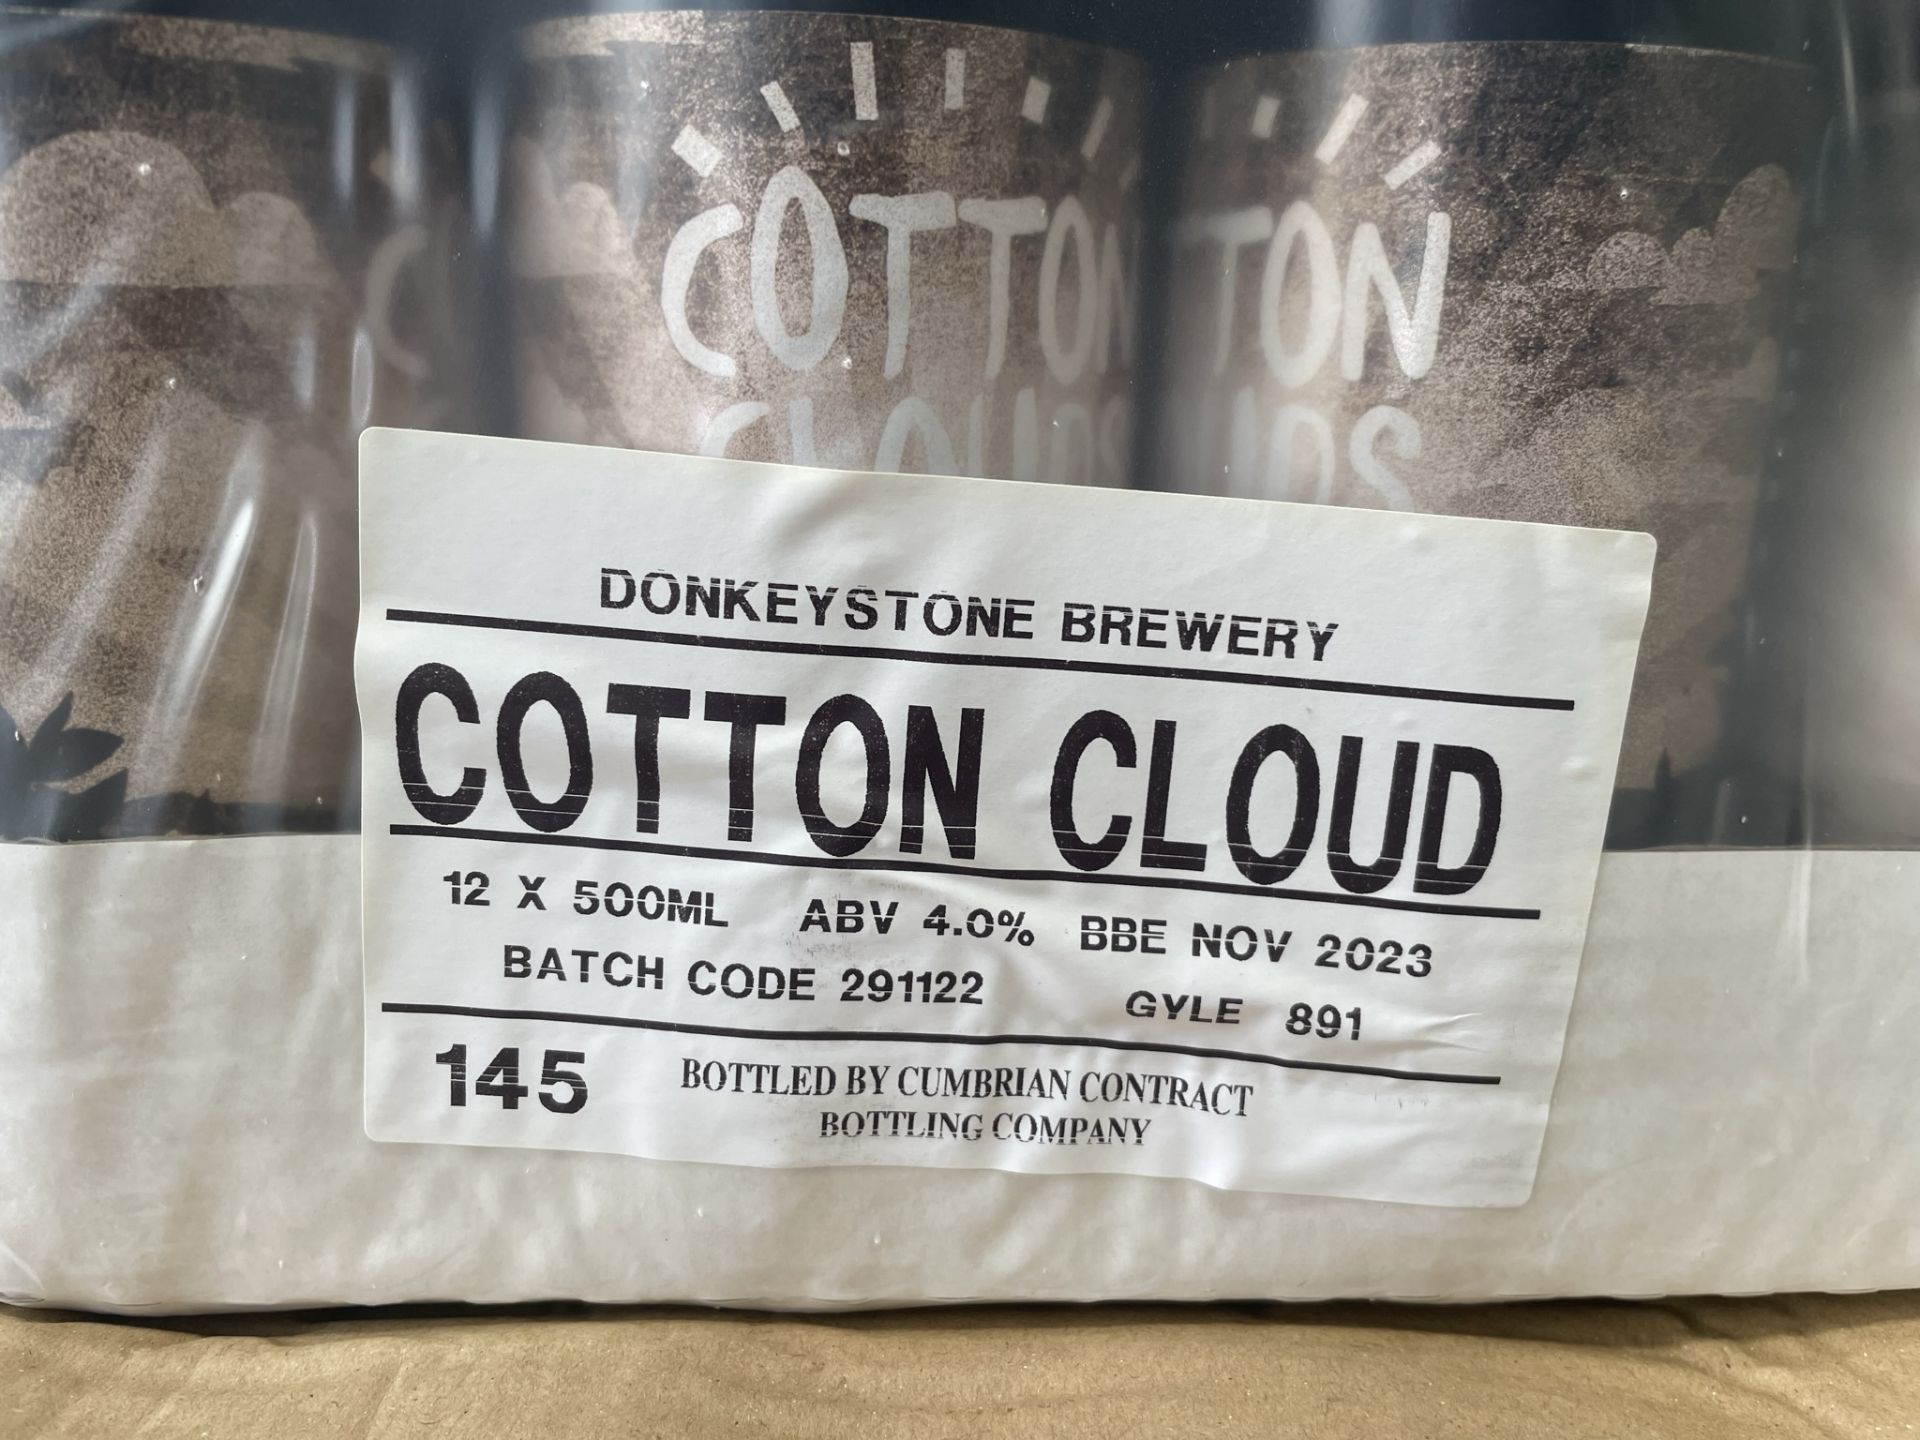 Approximately 696 x 500ml Bottles of DonkeyStone Brewing Co 'Cotton Cloud' Craft Ale | BB: Nov 2023 - Image 5 of 5